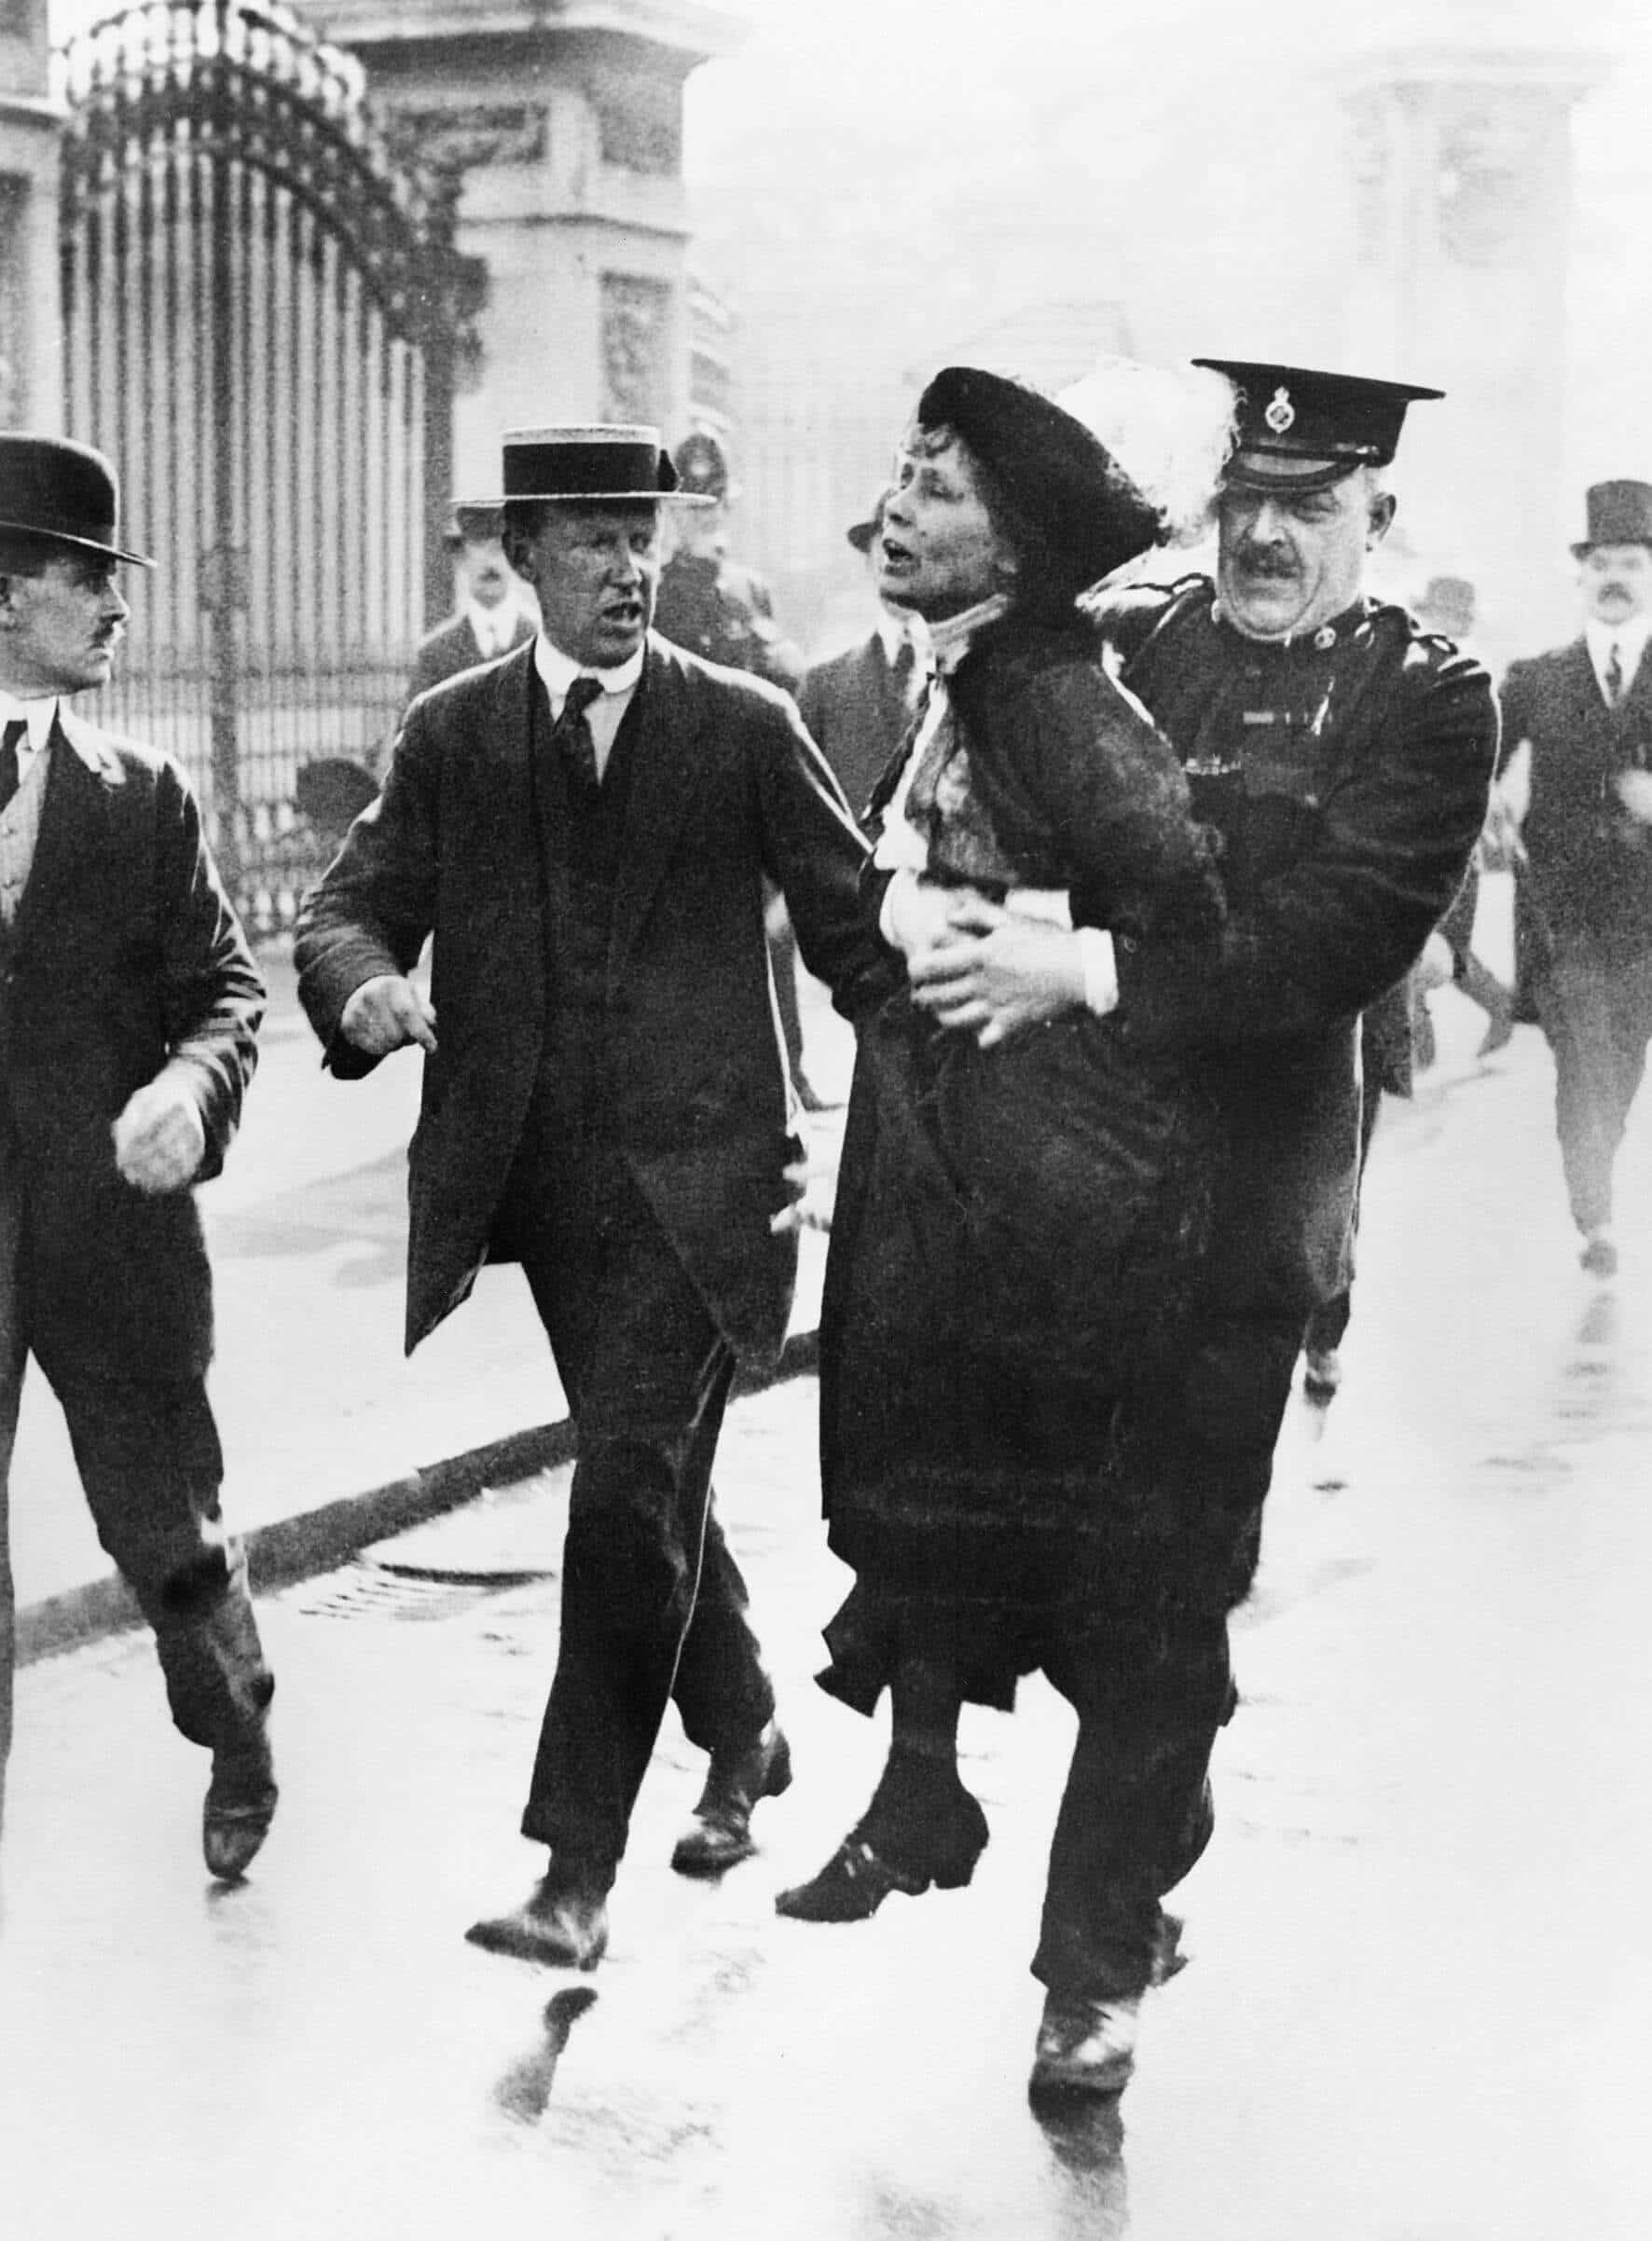 Emmeline Pankhurst, suffragette, carried away by police